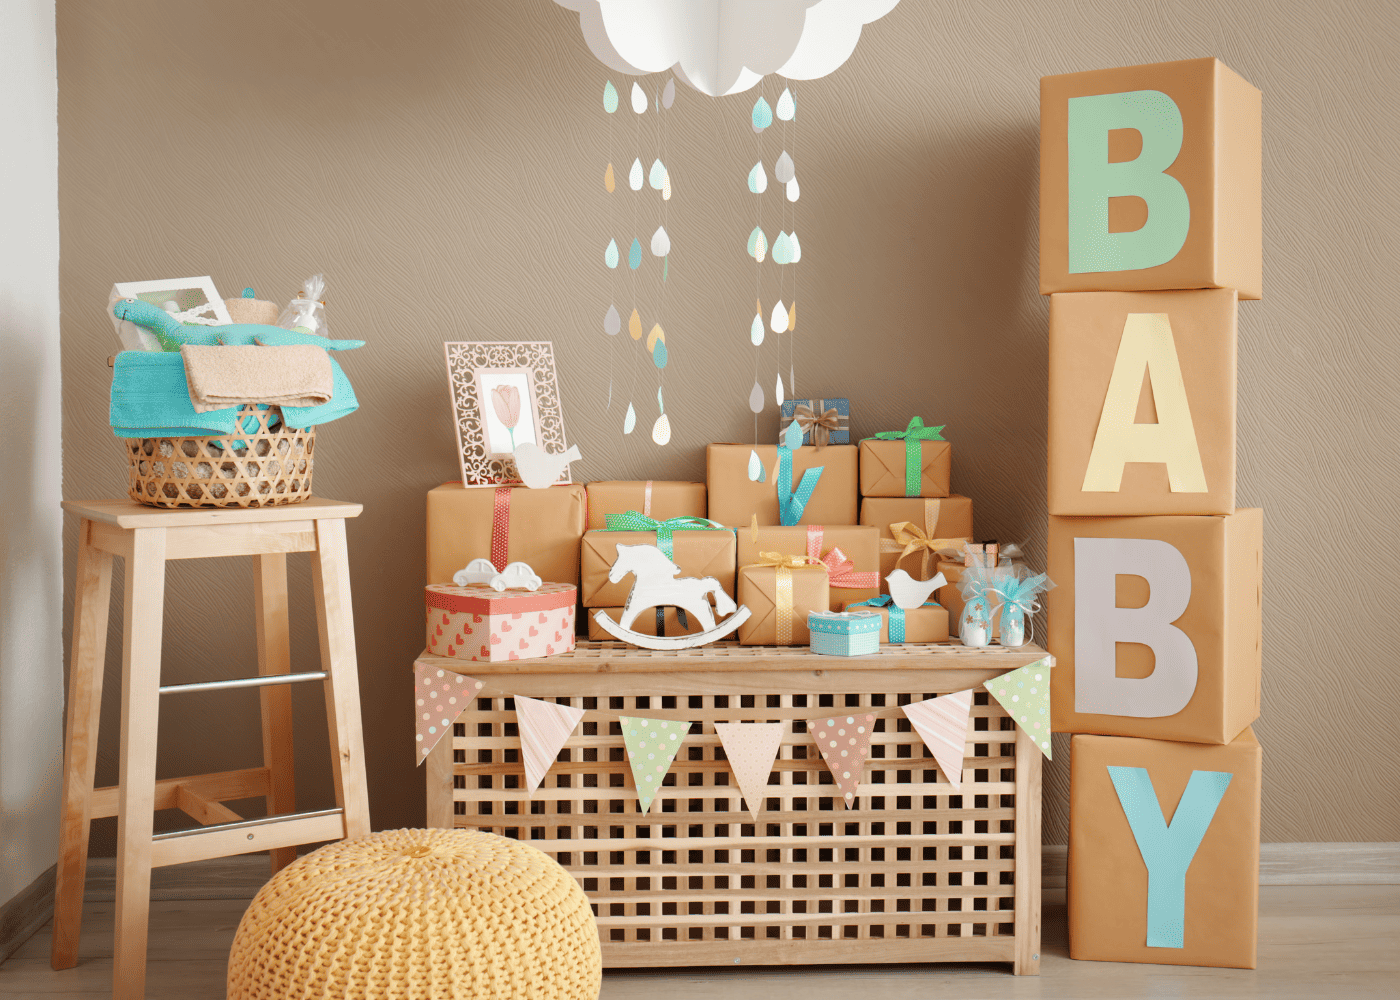 A table of presents at a baby shower with boxes on the right that spell "BABY."